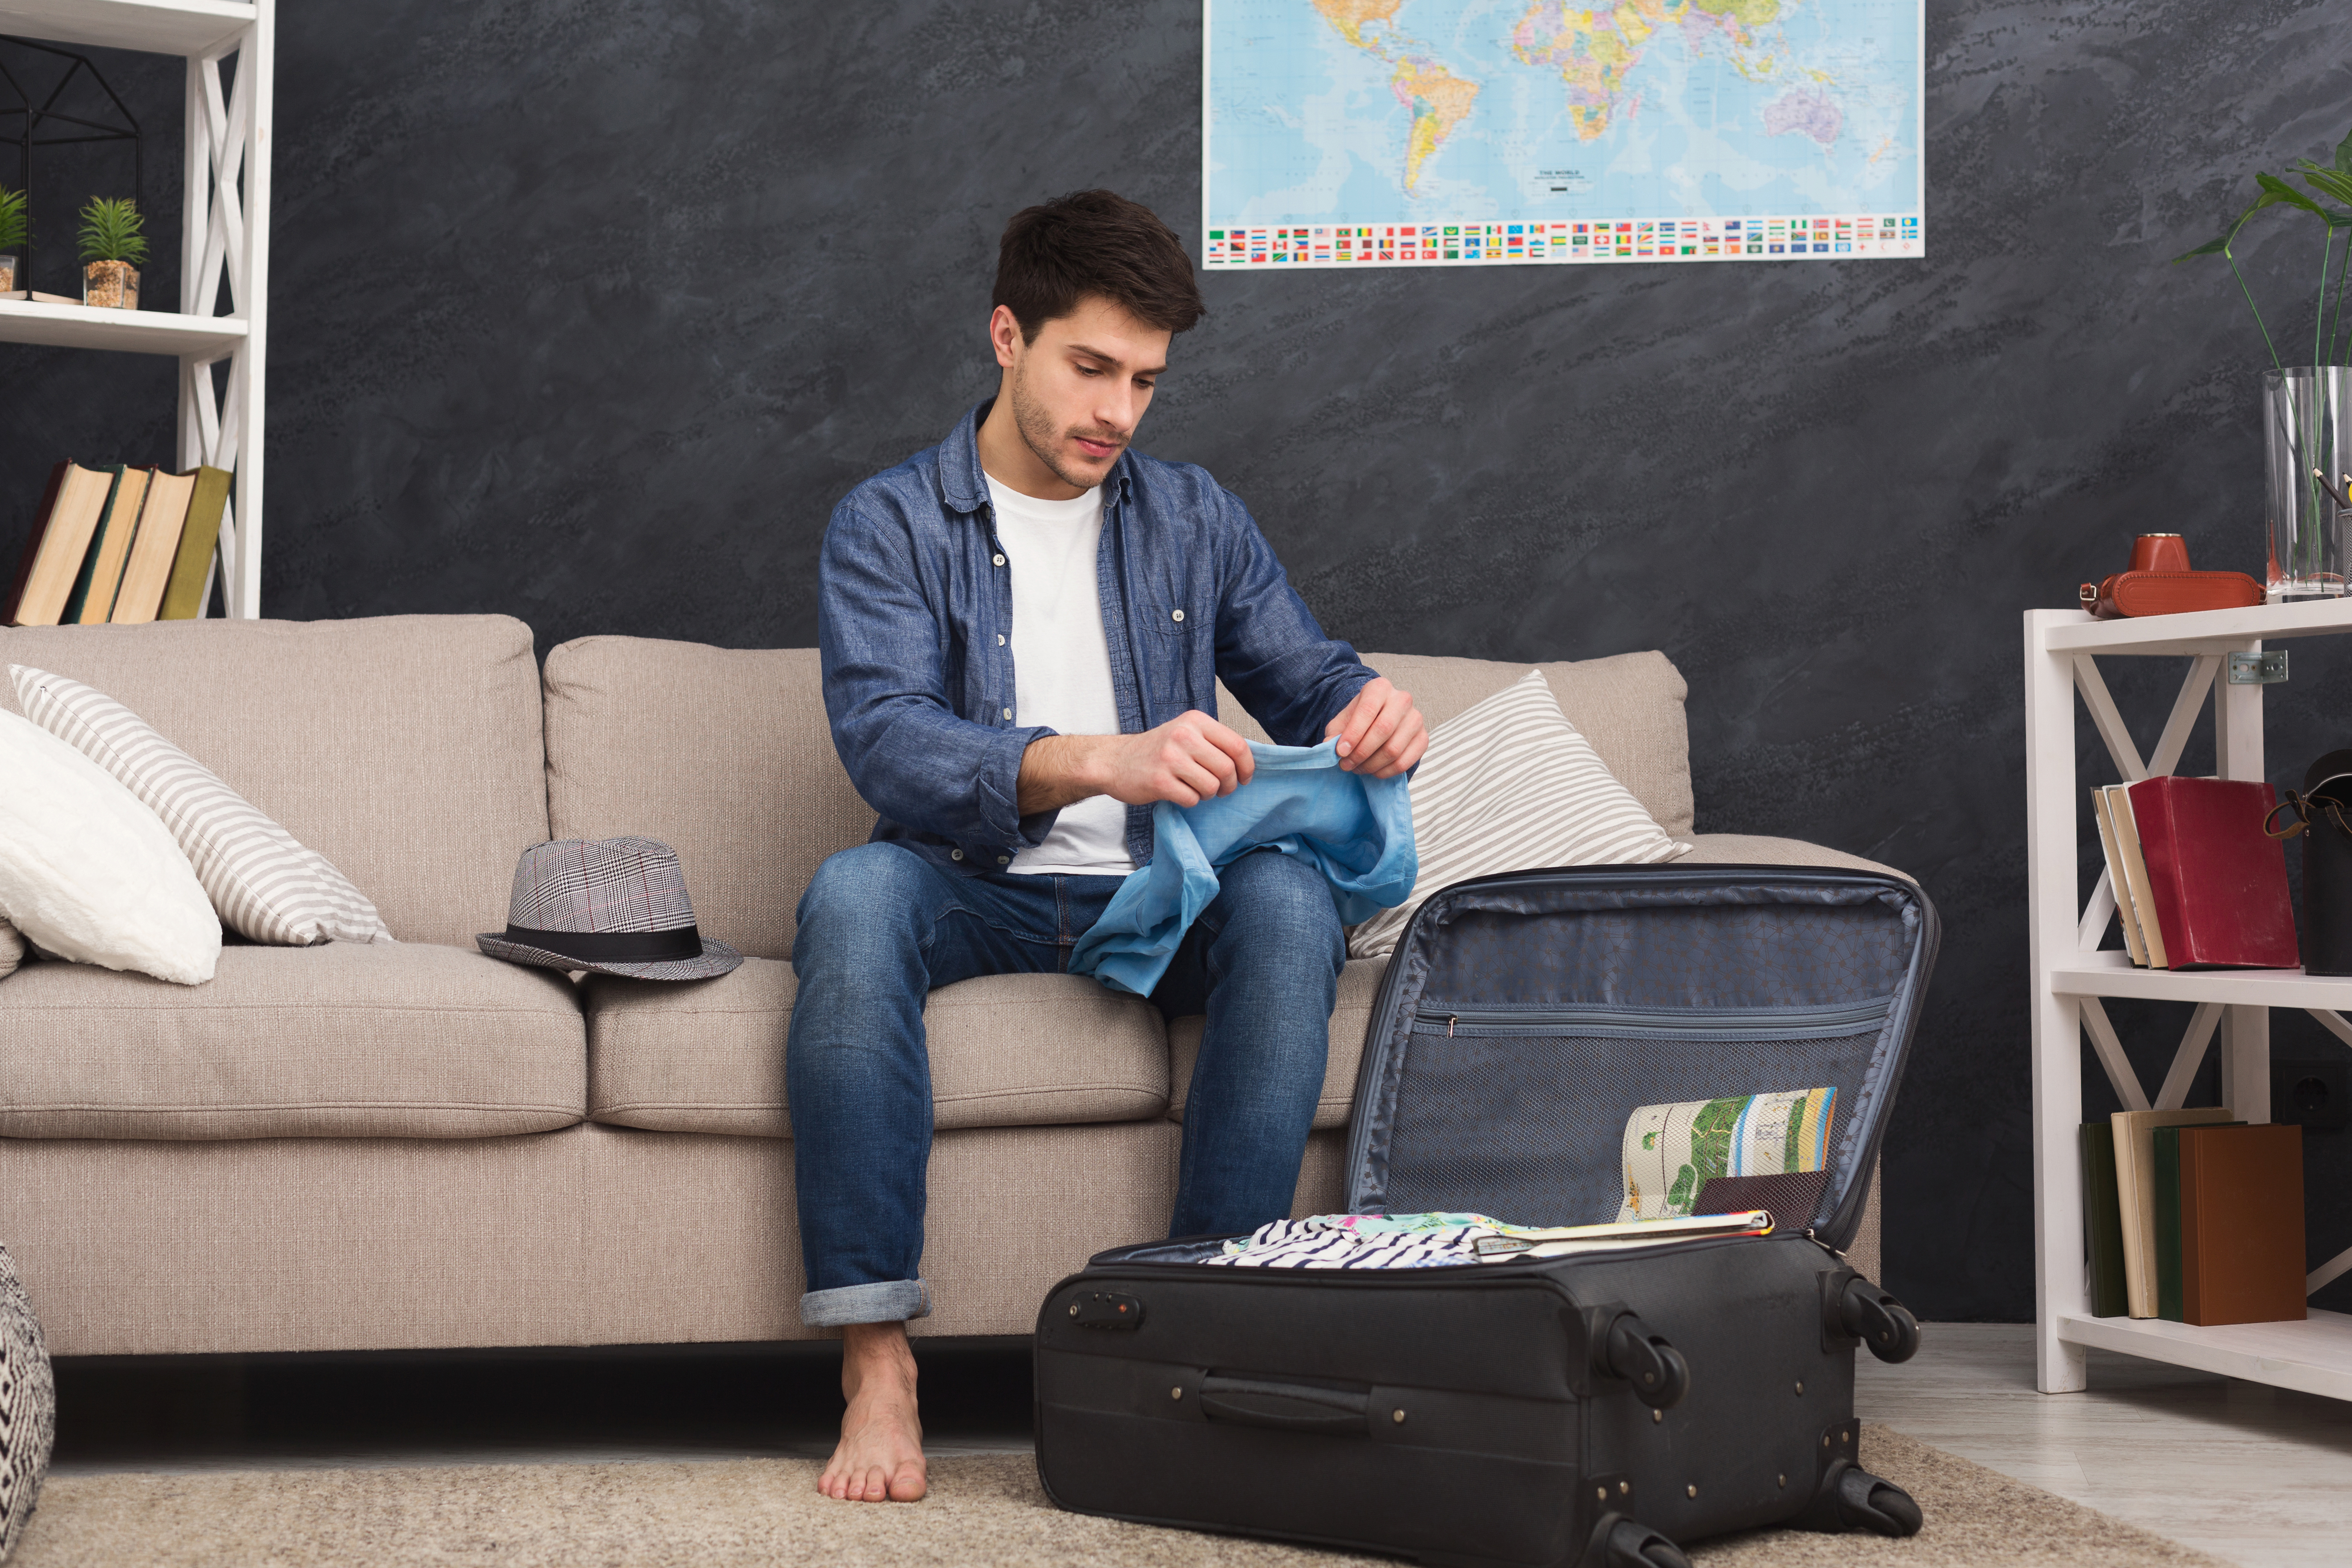 A young man is pictured packing his clothes | Source: Shutterstock